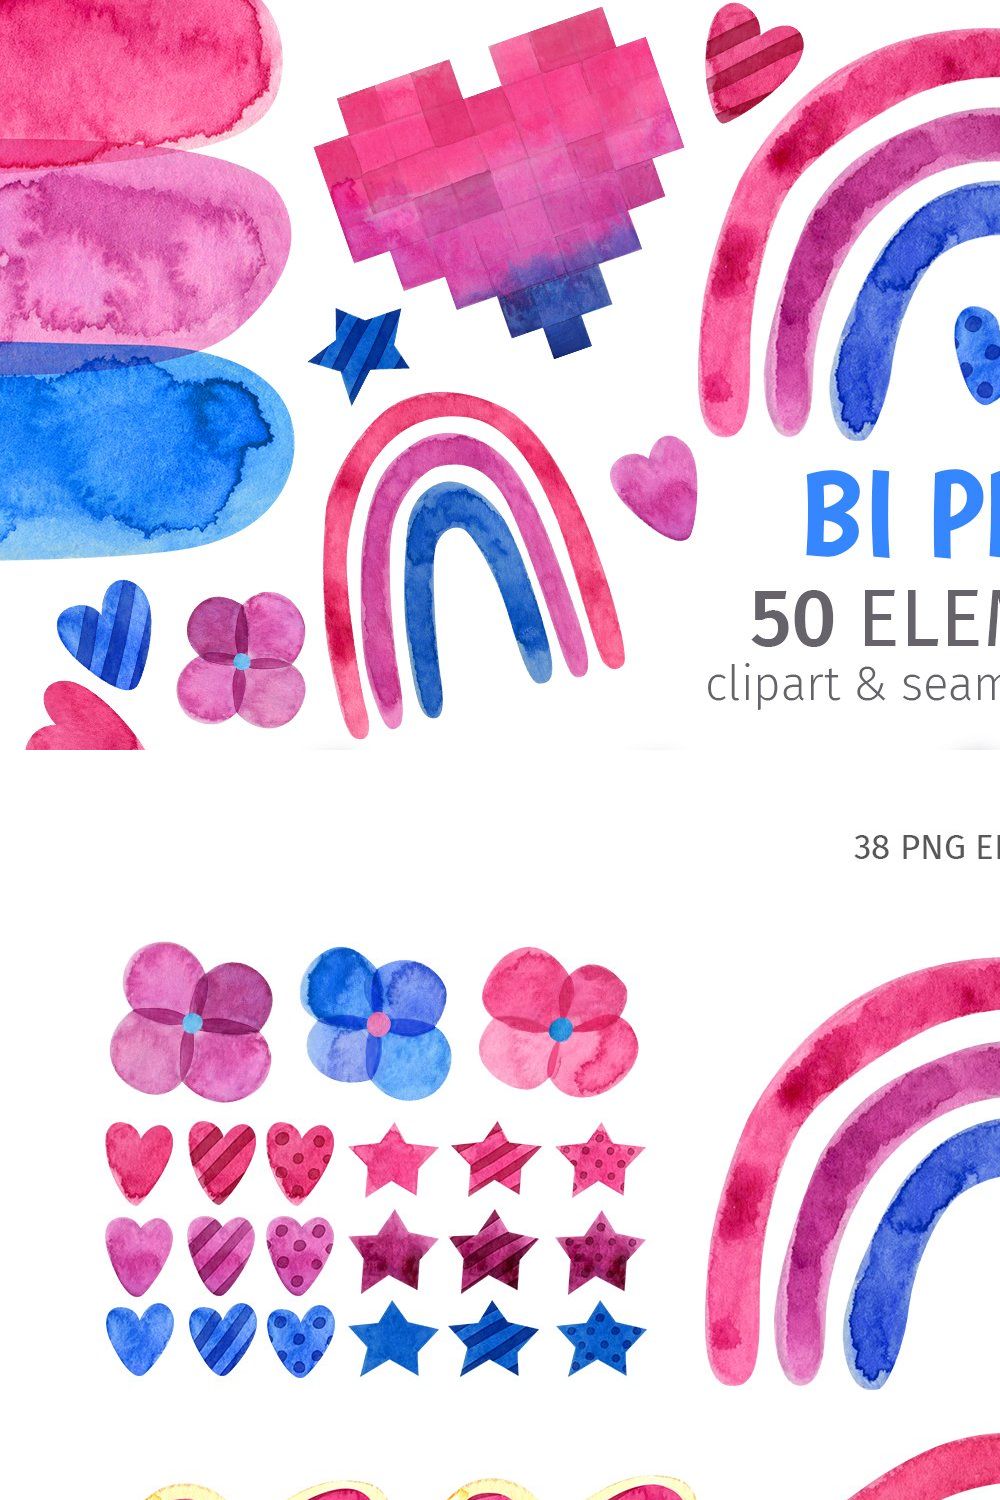 Bisexual pride clipart and patterns pinterest preview image.